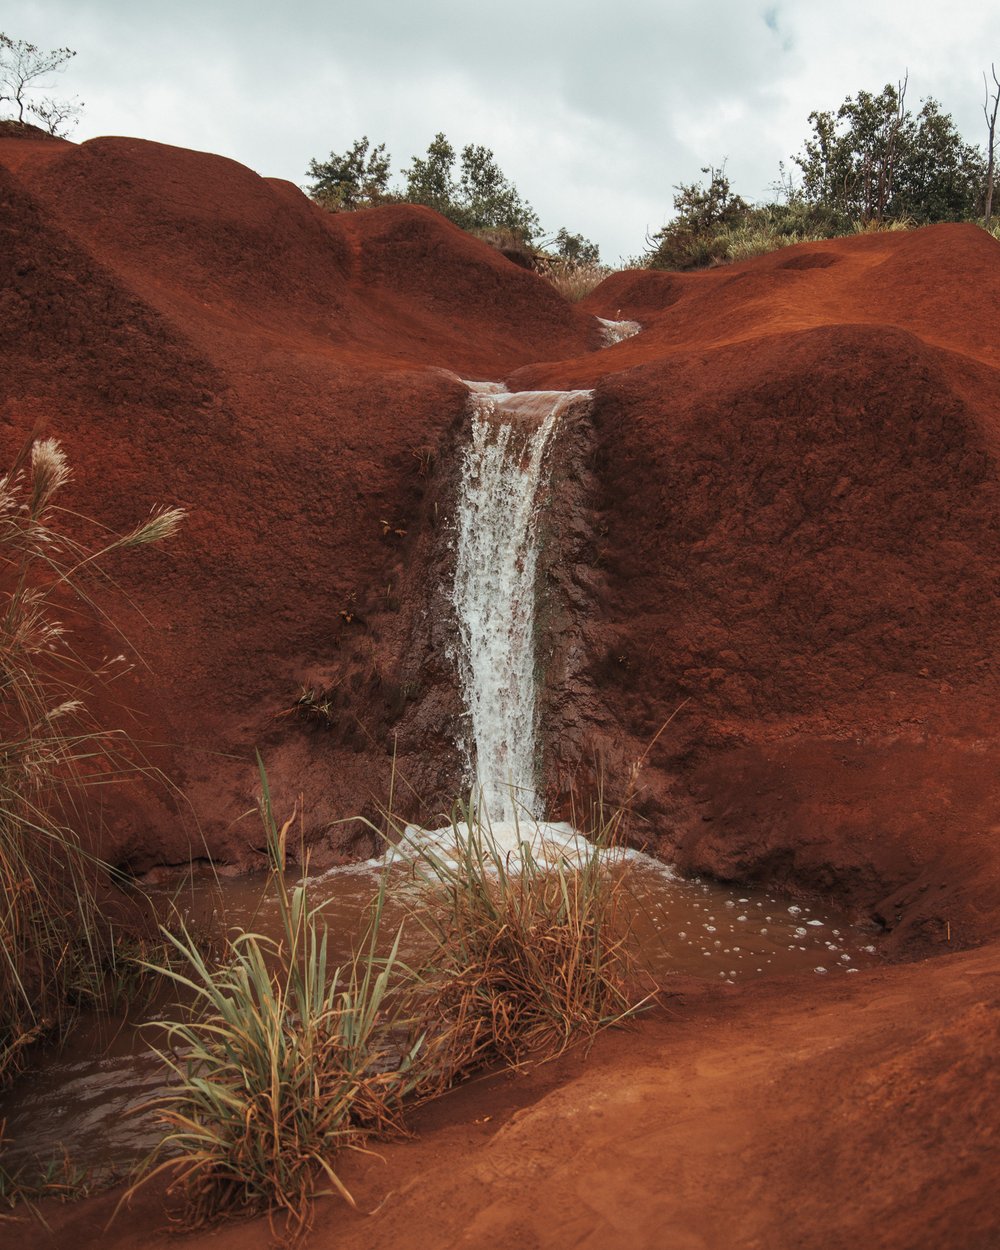   Red dirt waterfall  is a cool pit stop on your way to Waimea Canyon 